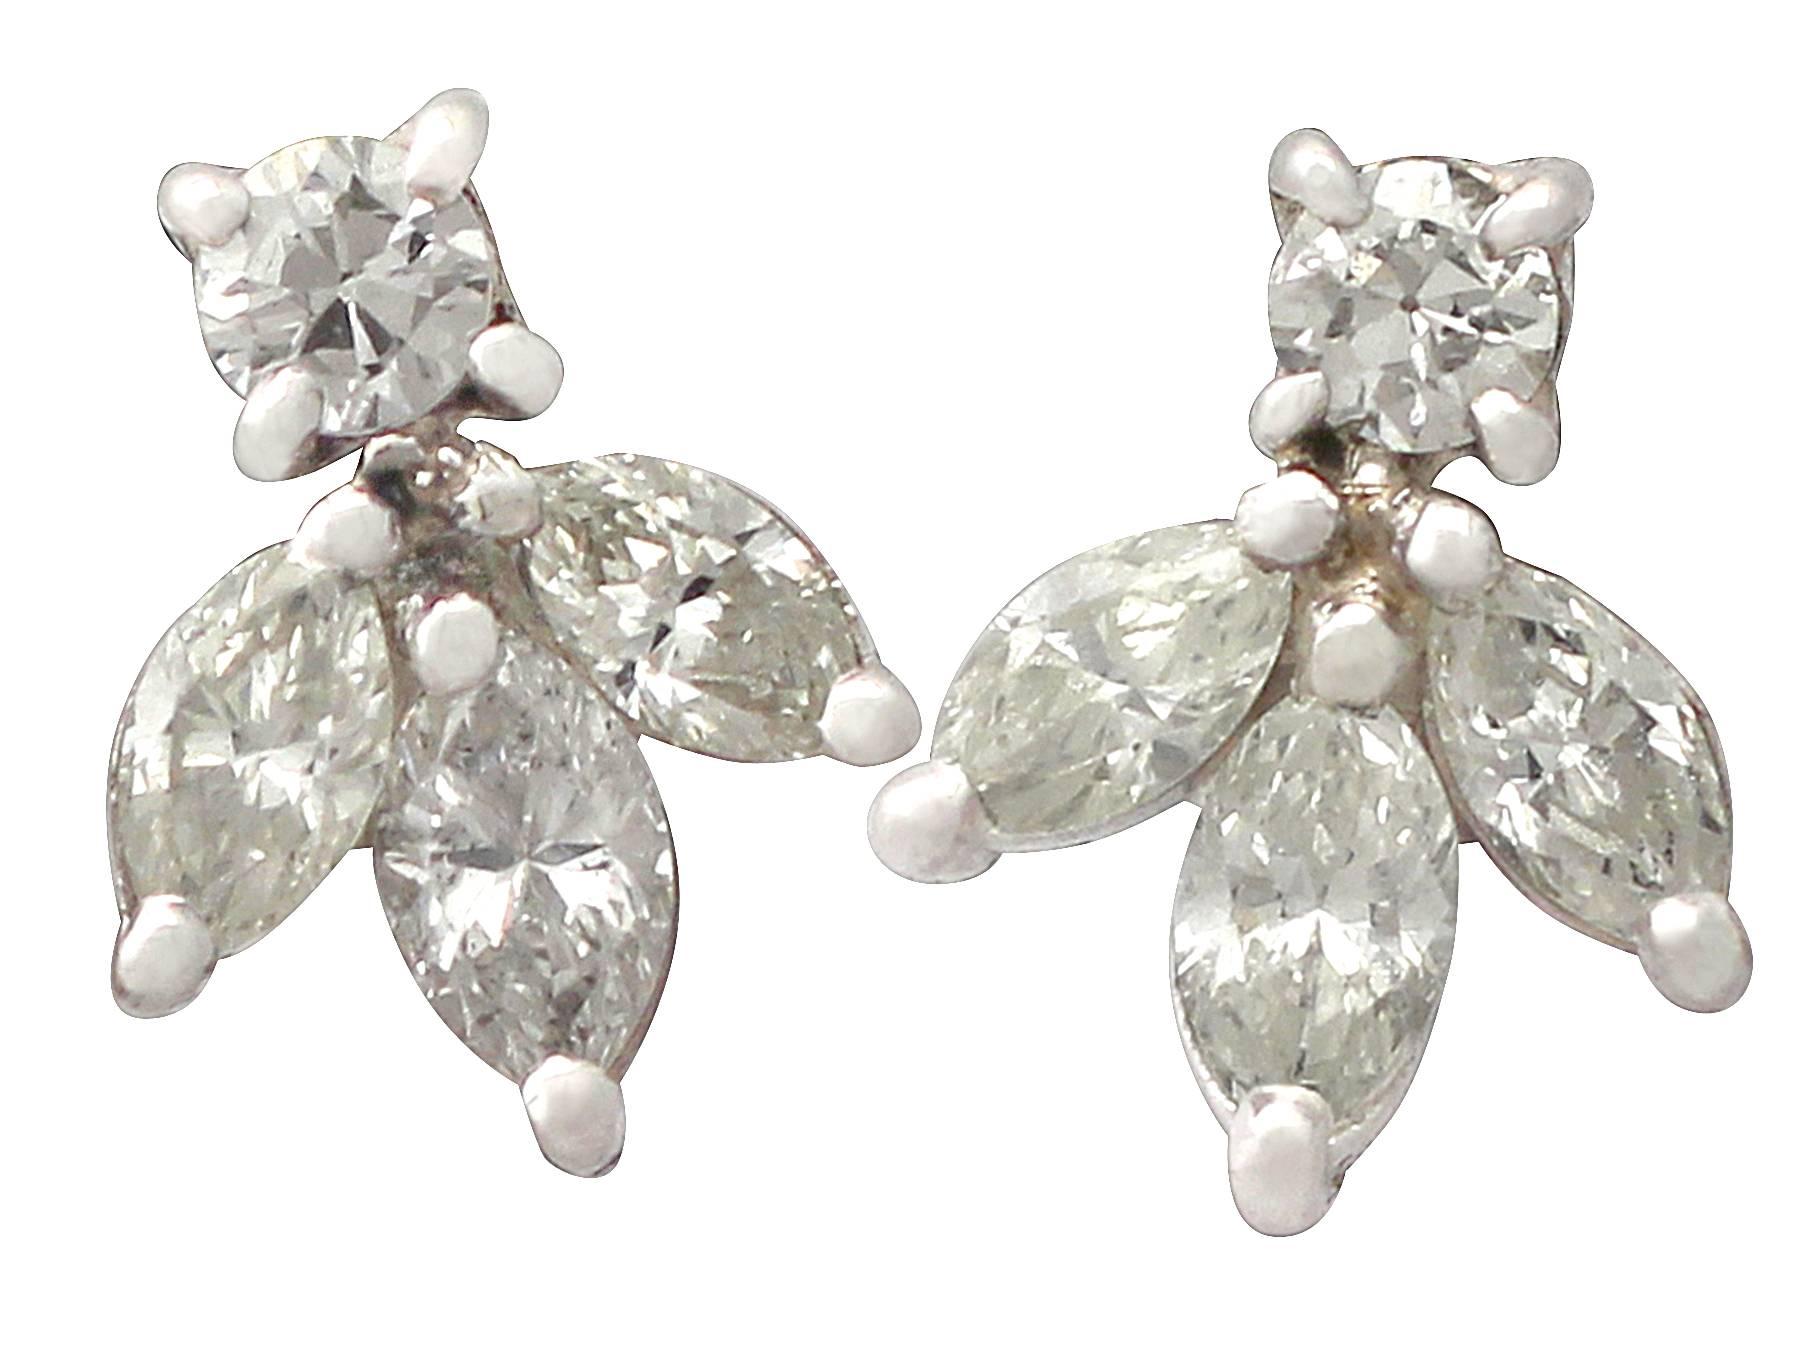 A fine and impressive pair of vintage 0.70 carat diamond (total) and 18k white gold stud earrings; part of our diverse vintage jewellery and estate jewelry collections

These fine and impressive earrings have been crafted in 18k white gold.

Each